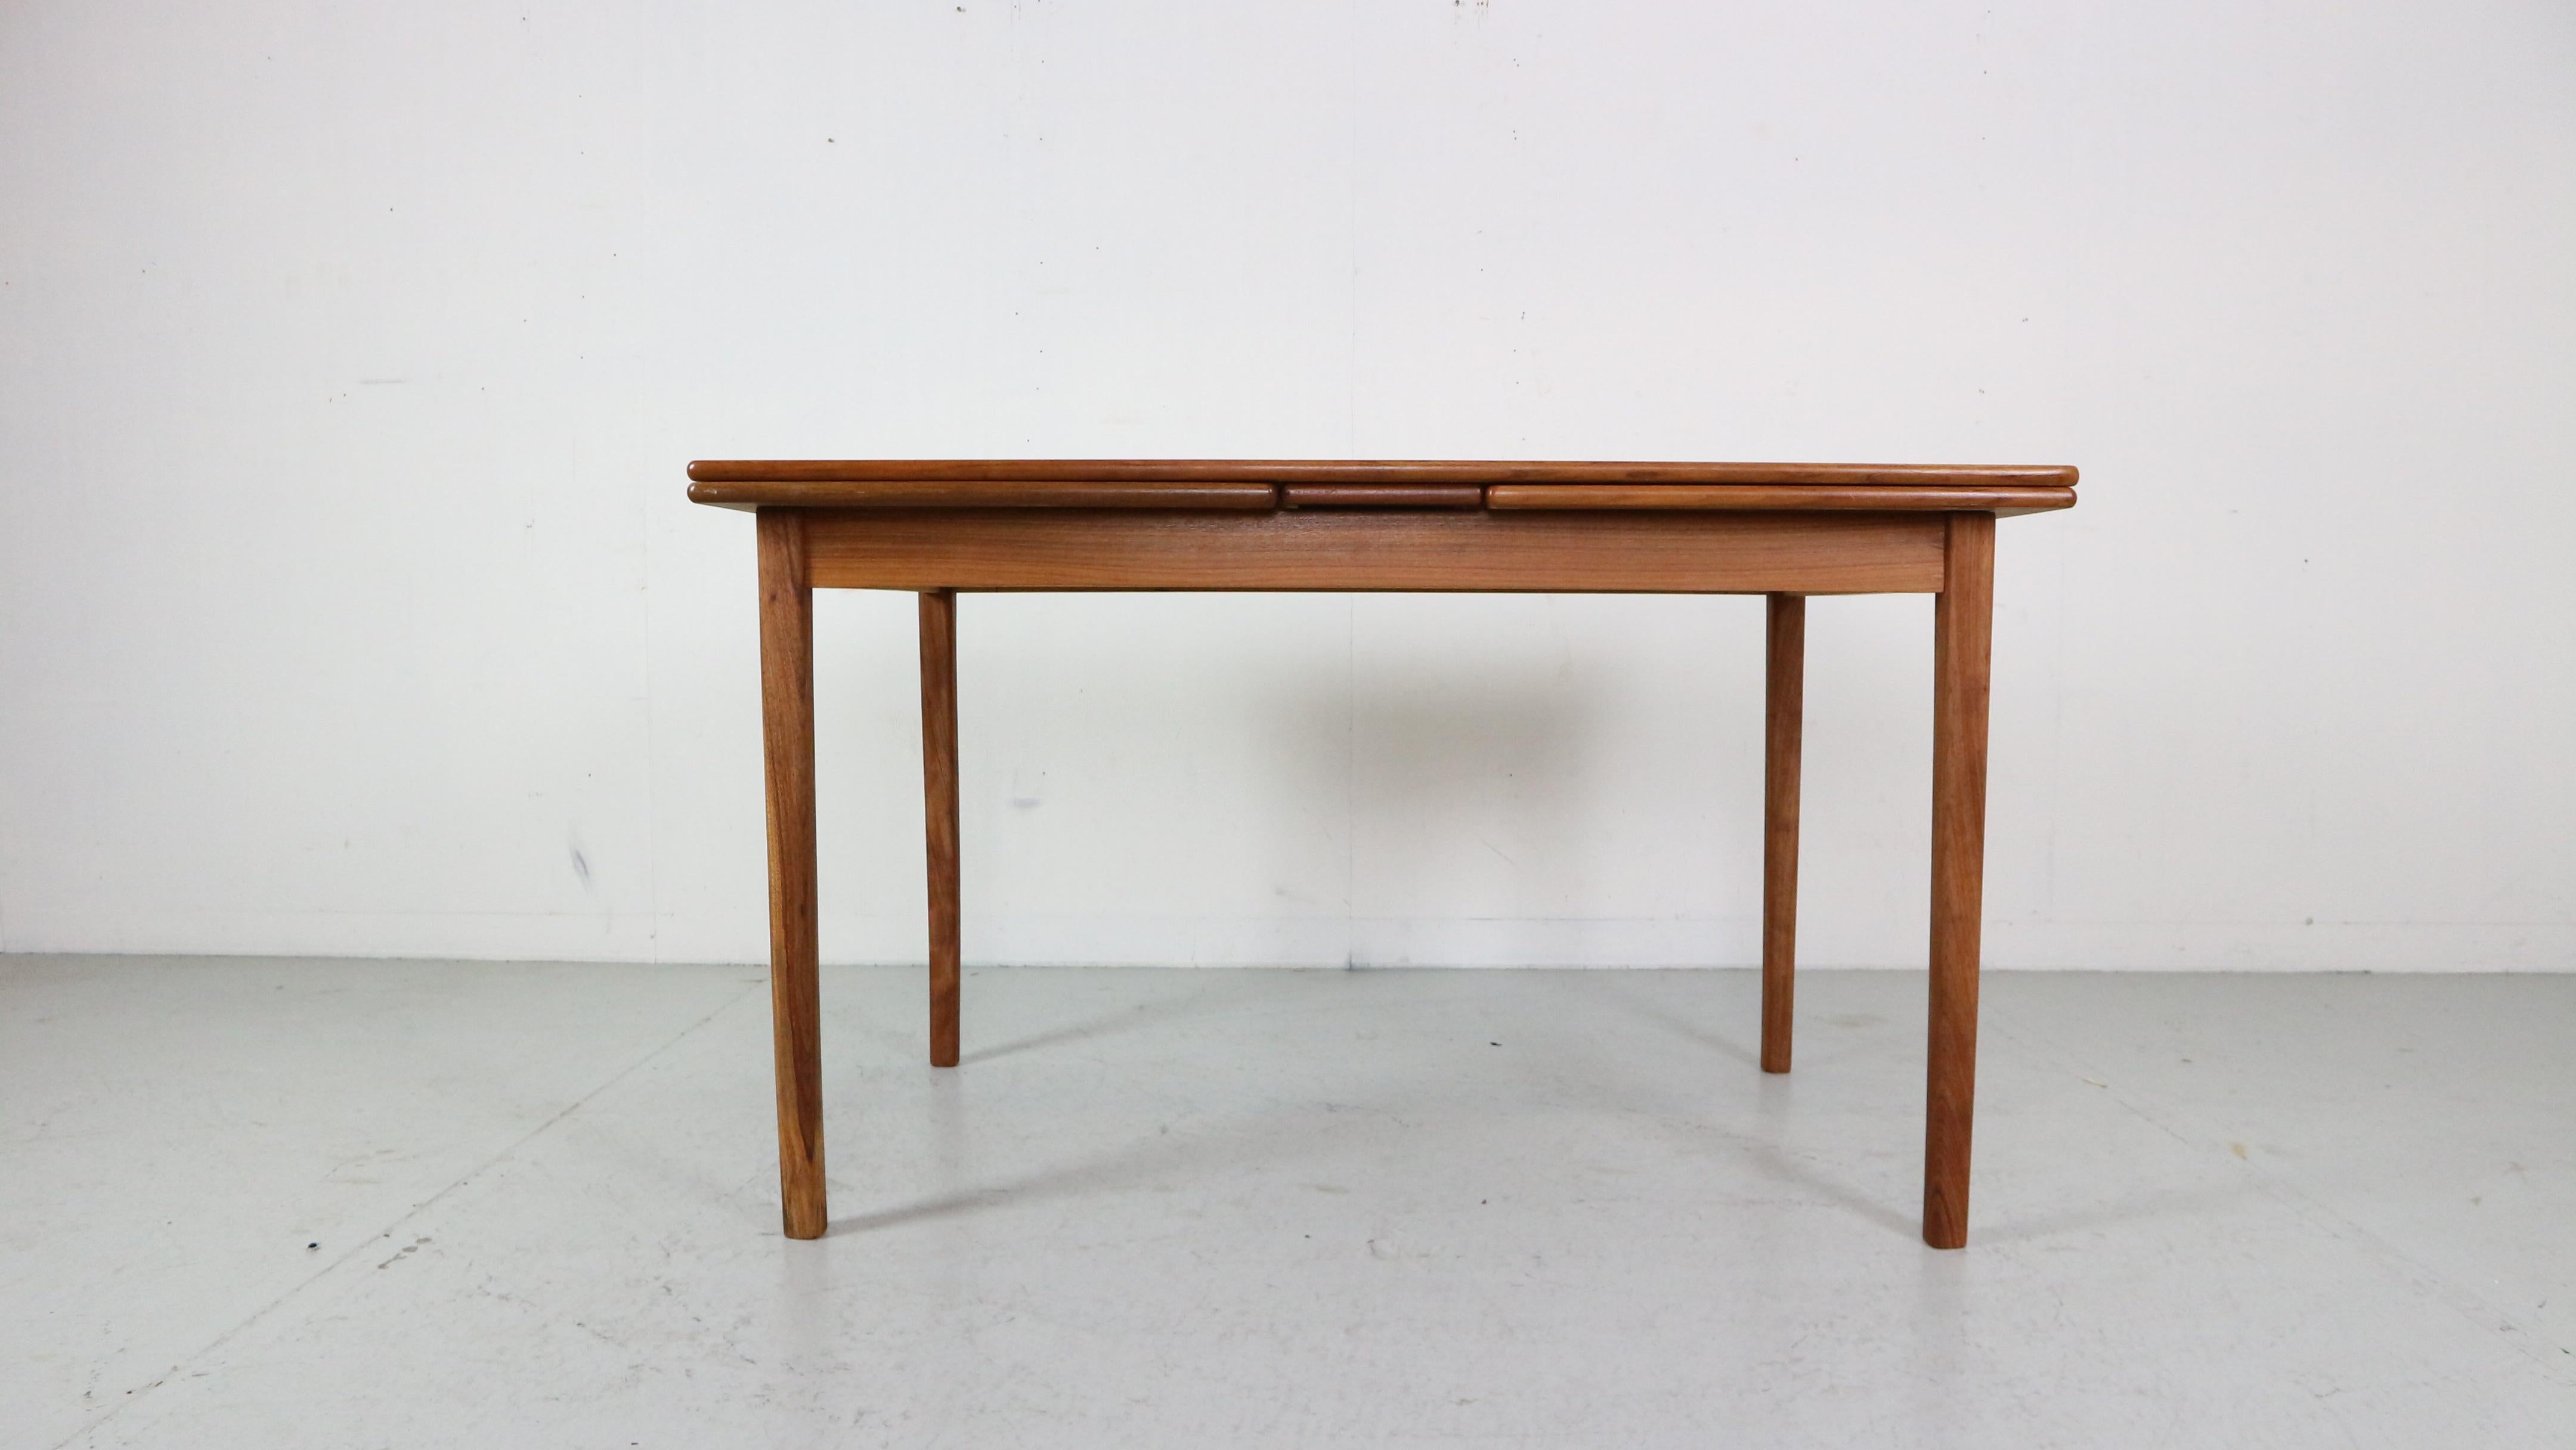 Mid-century period design extendable dinning table made from teak wood. Has beautiful wood pattern and elegant legs.
Made in Denmark, 1960s.
Dimensions: 128cm - Extendable 236cm.
 
The legs can be unscrewed for a shipping.
Extendable two leaves fits